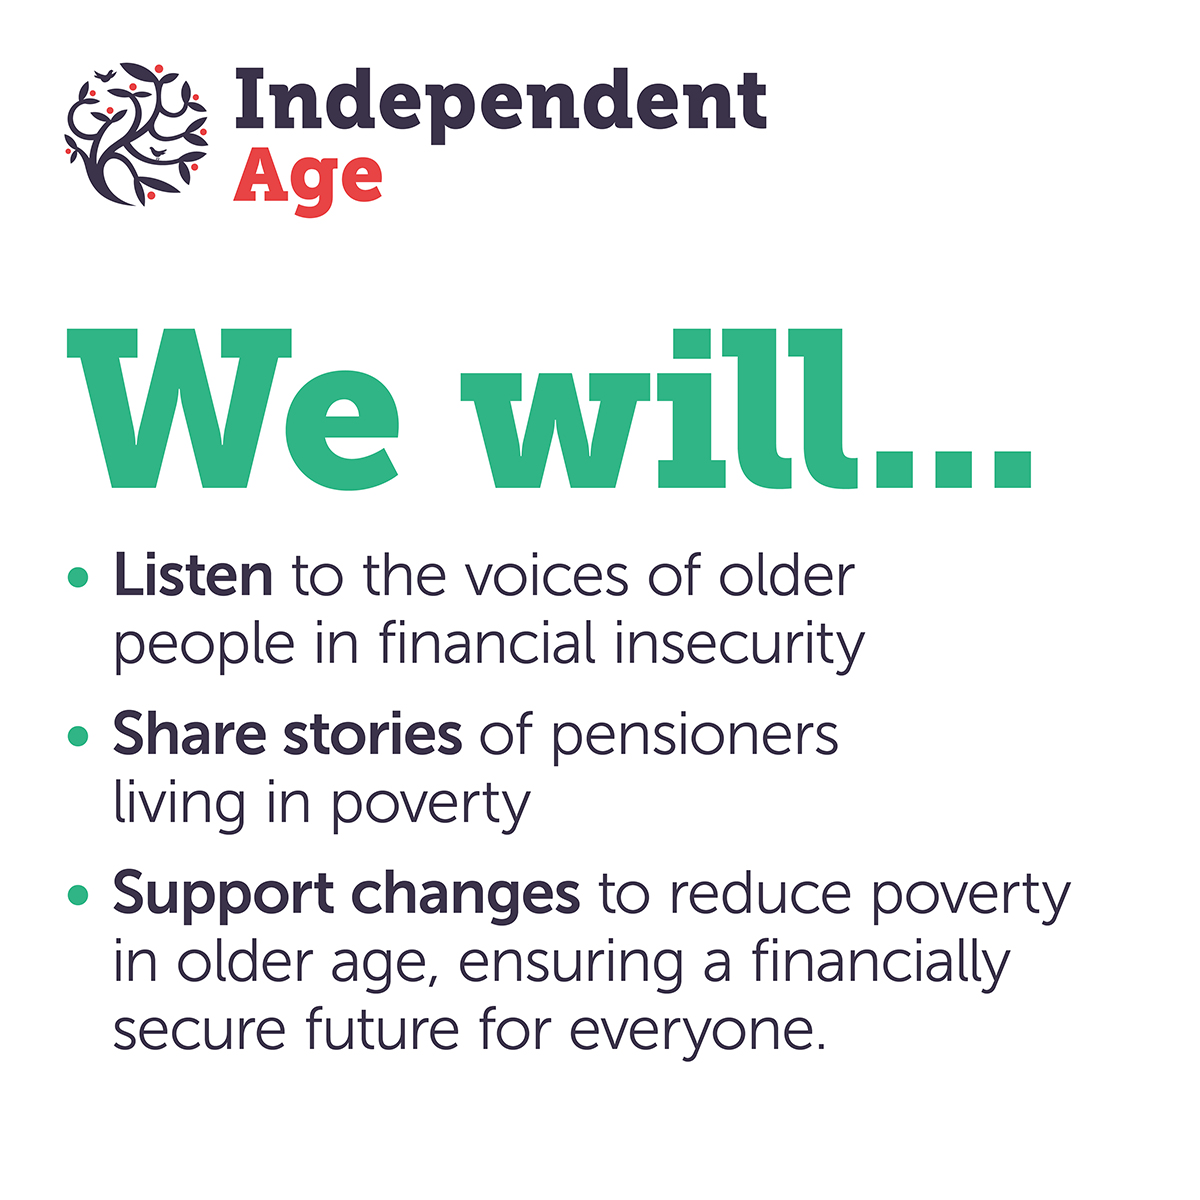 In the UK, around 2 million older people are cutting essentials and living in cold, damp homes to get by. But poverty in later life is not inevitable. That's why we've signed @IndependentAge's statement of to help tackle pensioner poverty. Learn more: Independentage.org/statement-of-i…